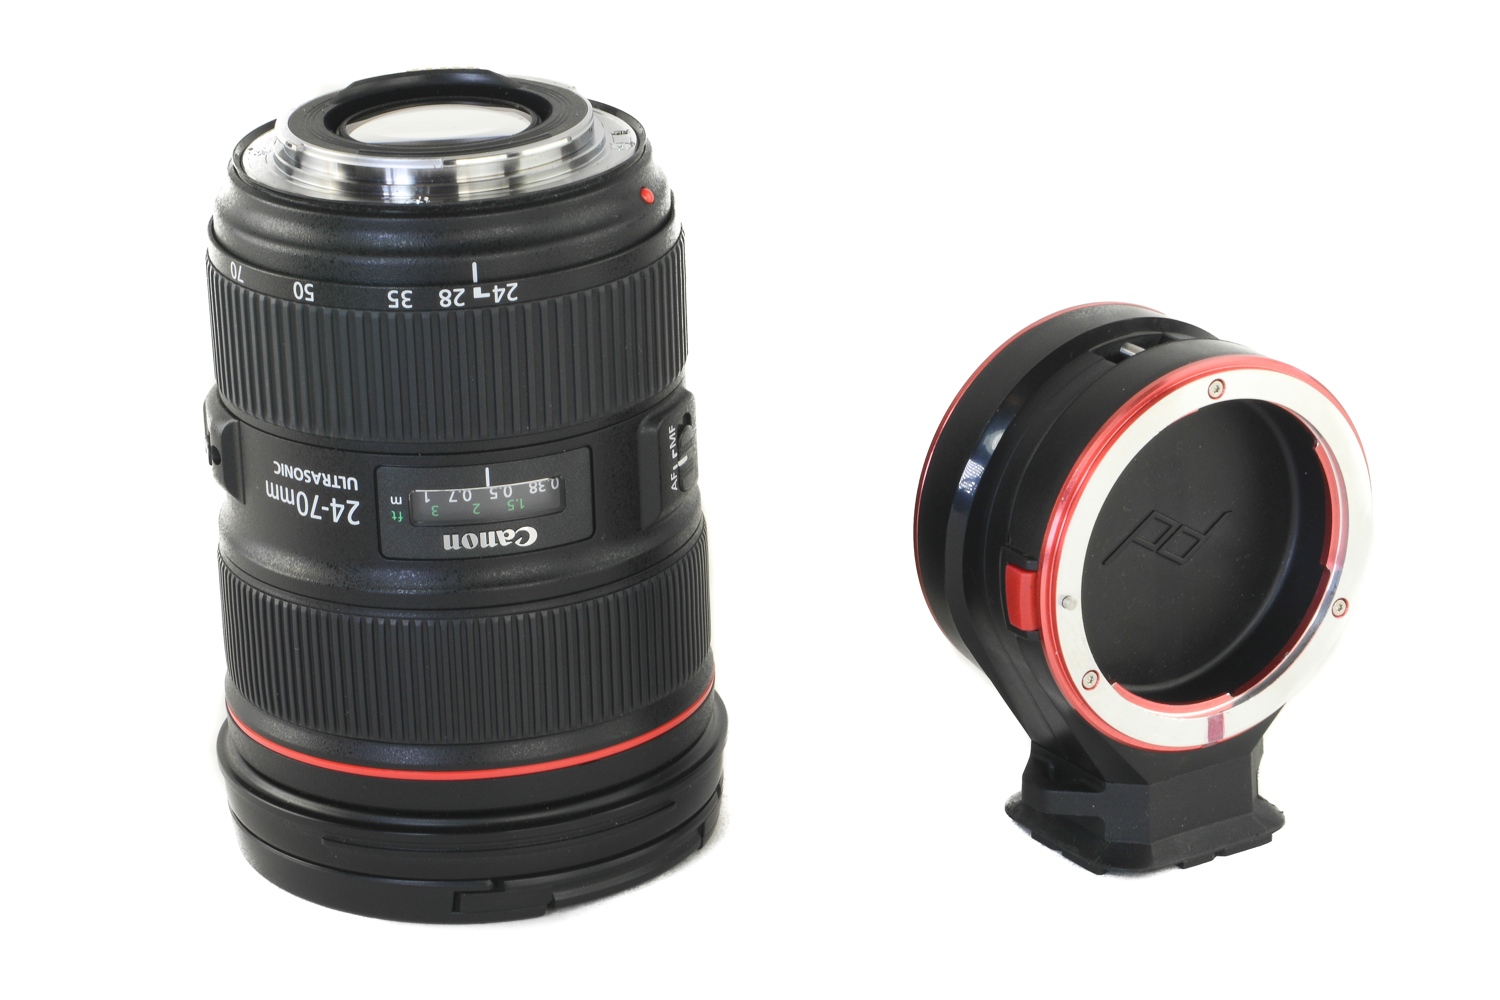 swapping lenses no longer a hassle with peak designs new accessory design capturelens 3